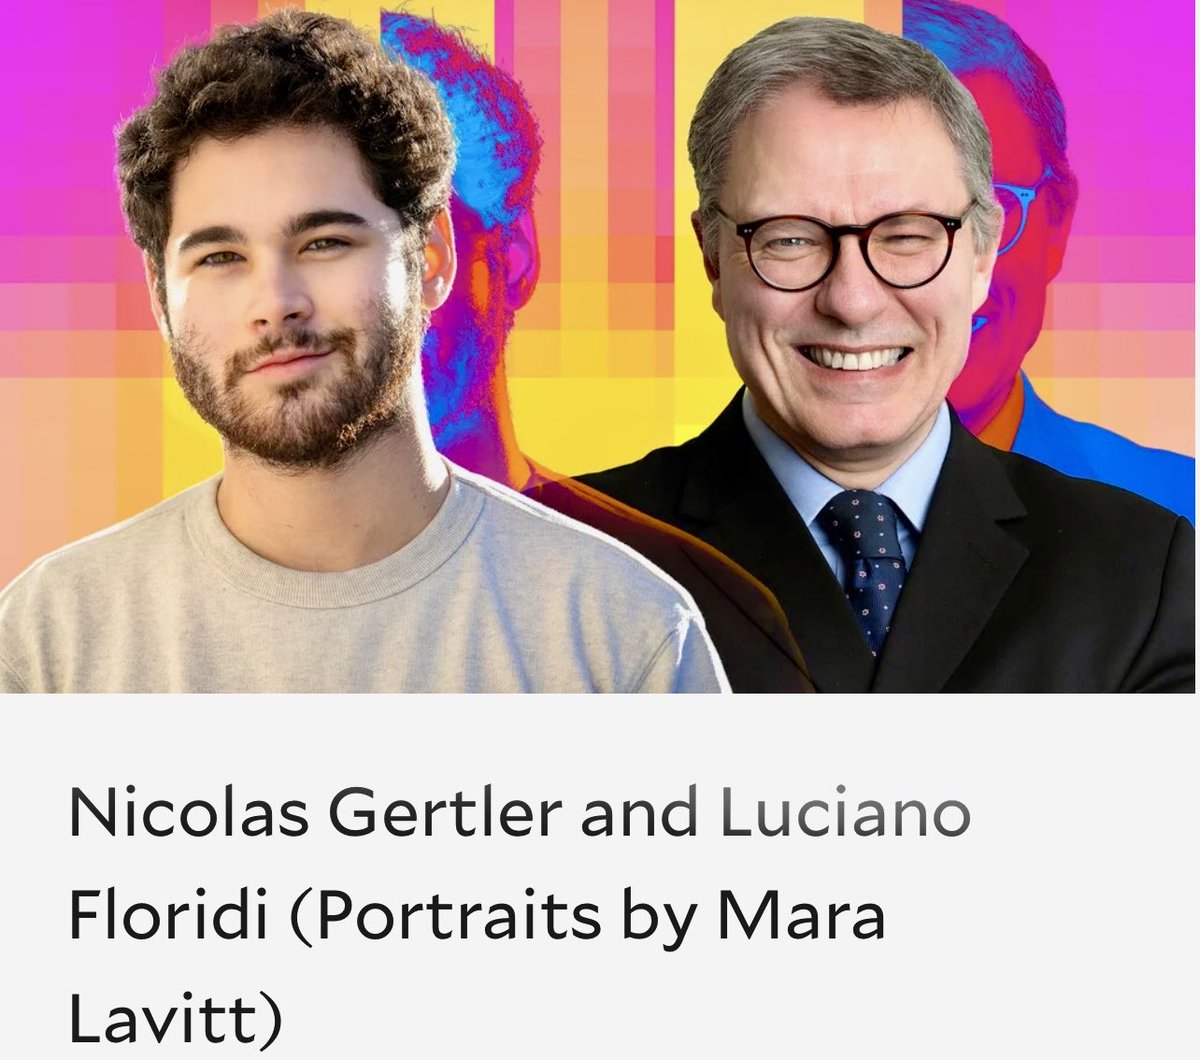 Student-developed #AI #chatbot opens #Yale philosopher’s works to all

Via @DECYale 
Digital Ethics Center

#NicholasGertler and #LucianoFloridi @Floridi 

✅See post above for #video on #LuFlotBot 
👆👆👆

#LuFlotBot #AI #GenAI #DigitalEthics #AIEthics 

CC: @PerBBerggreen…